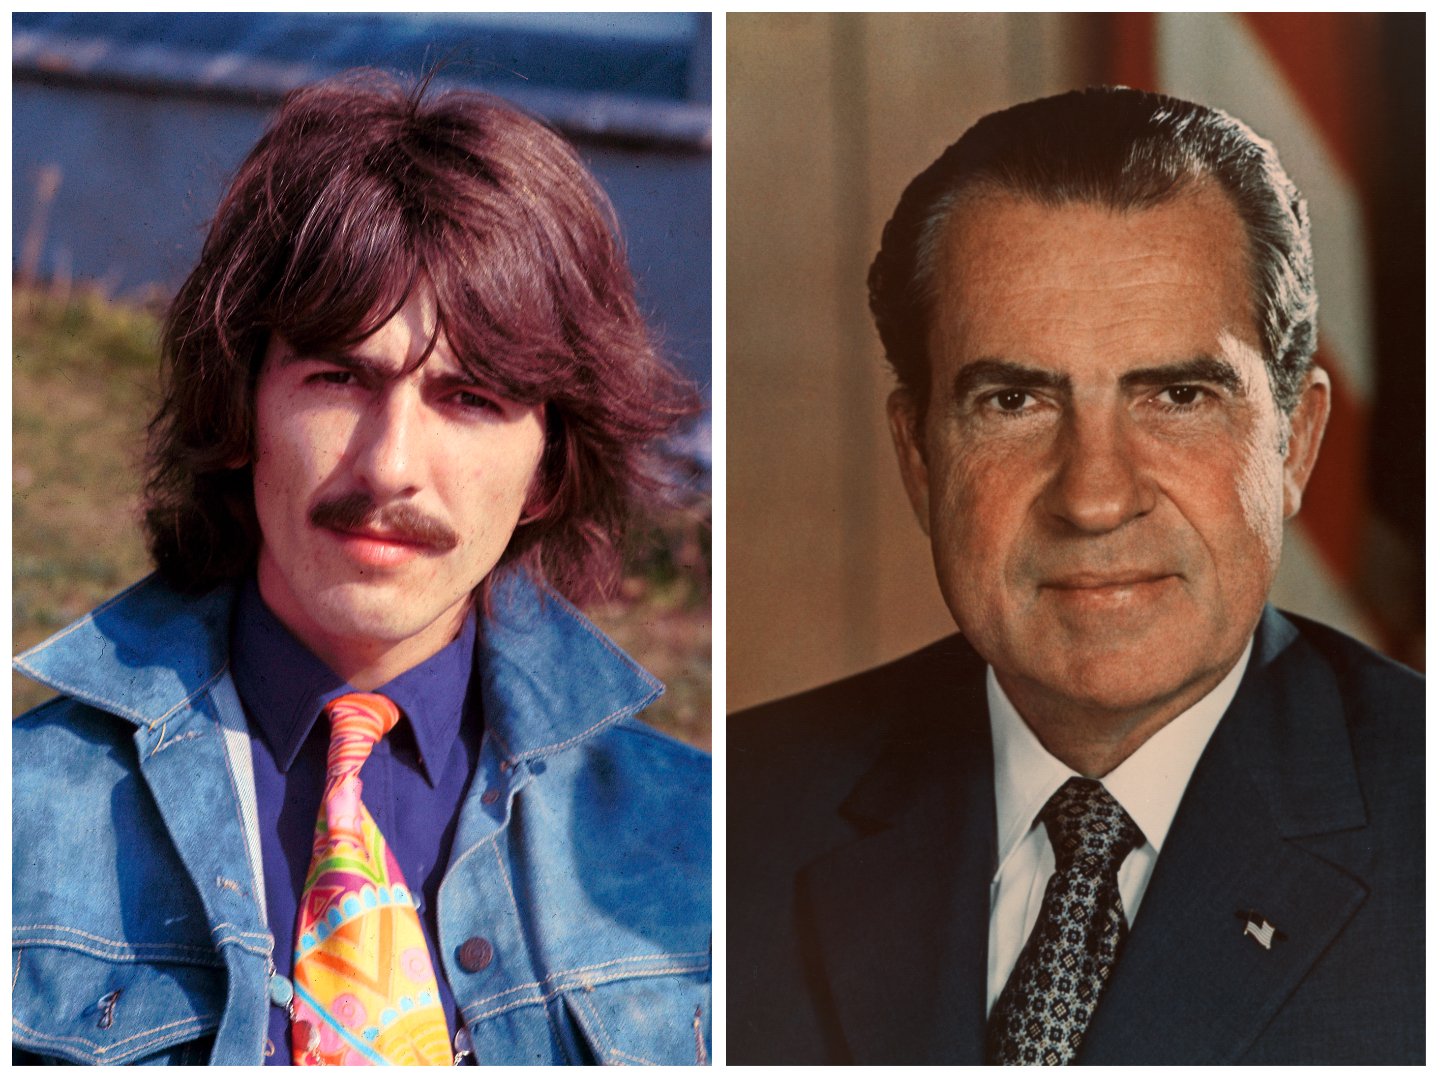 George Harrison sits outside near water. Richard Nixon sits in front of an American flag.